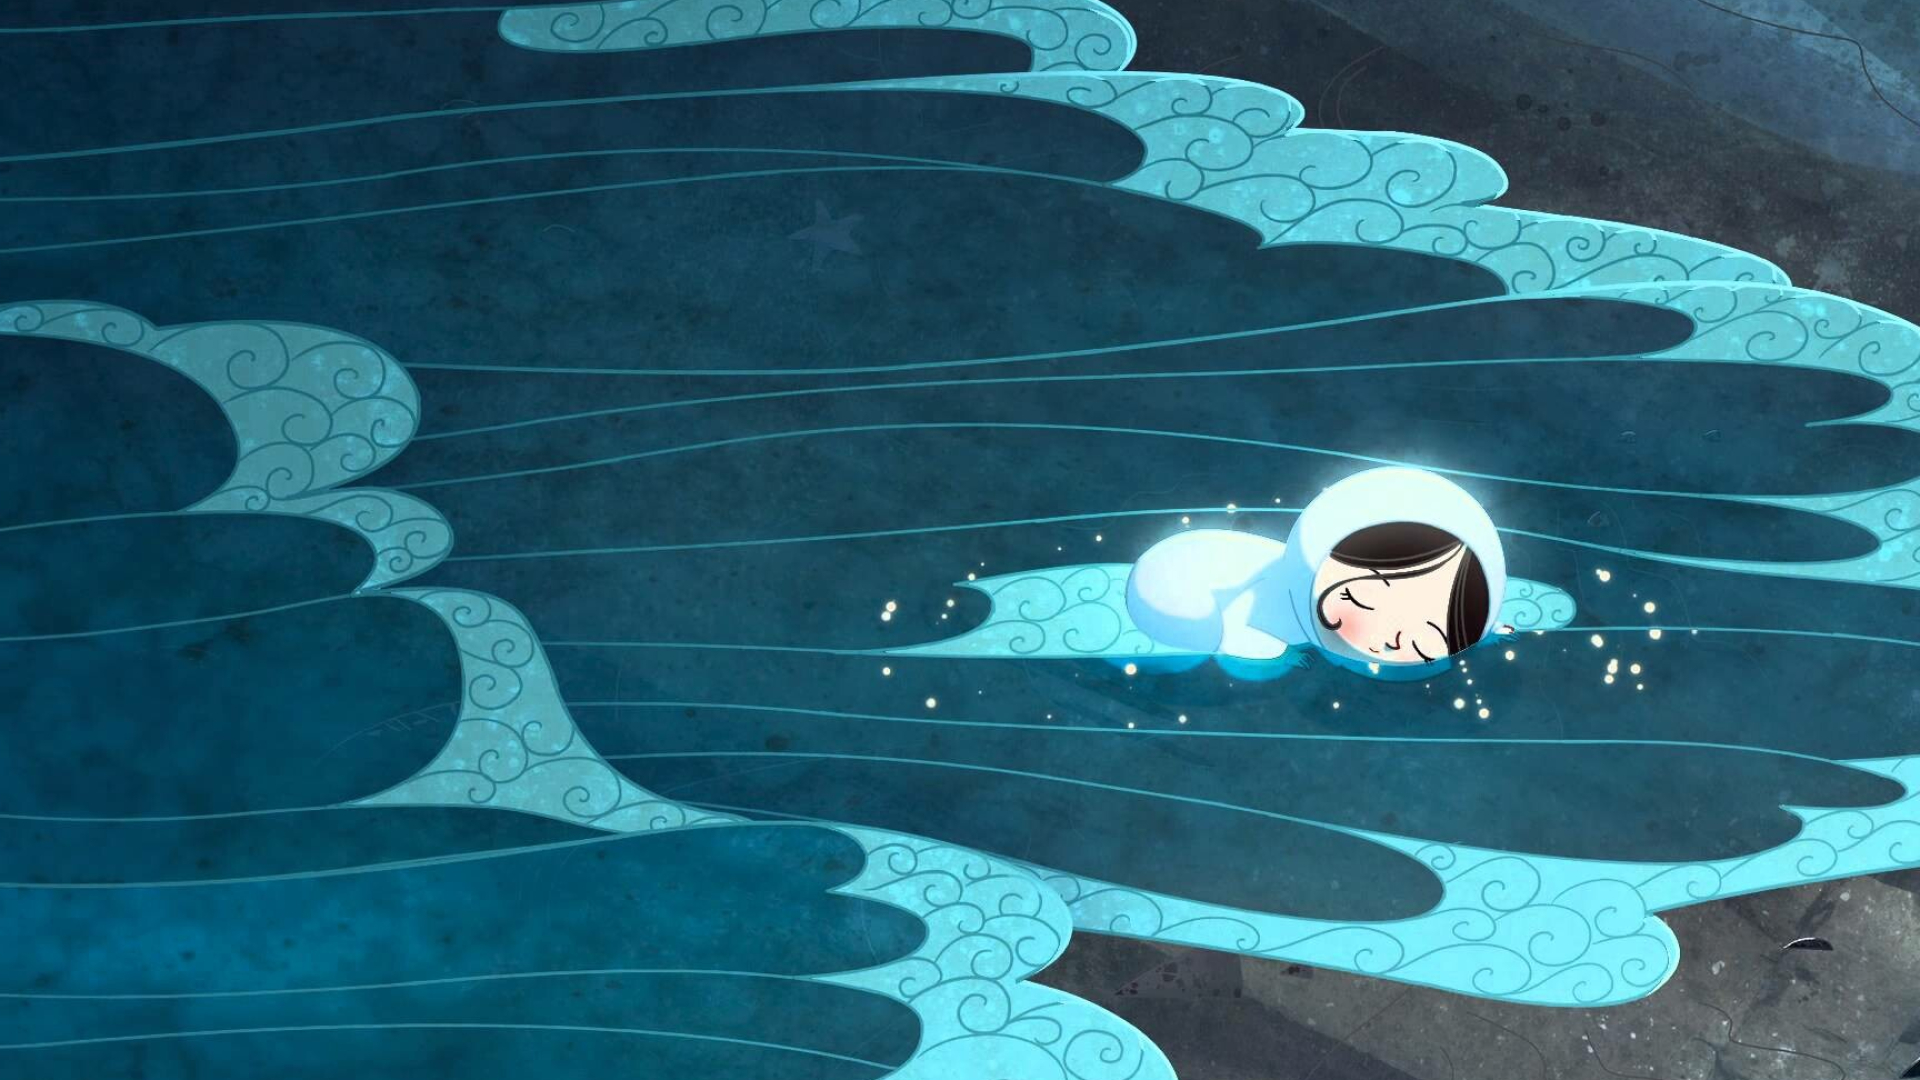 Song of the Sea: Nominated for Best Animated Feature at the 87th Academy Awards, Saoirse. 1920x1080 Full HD Wallpaper.